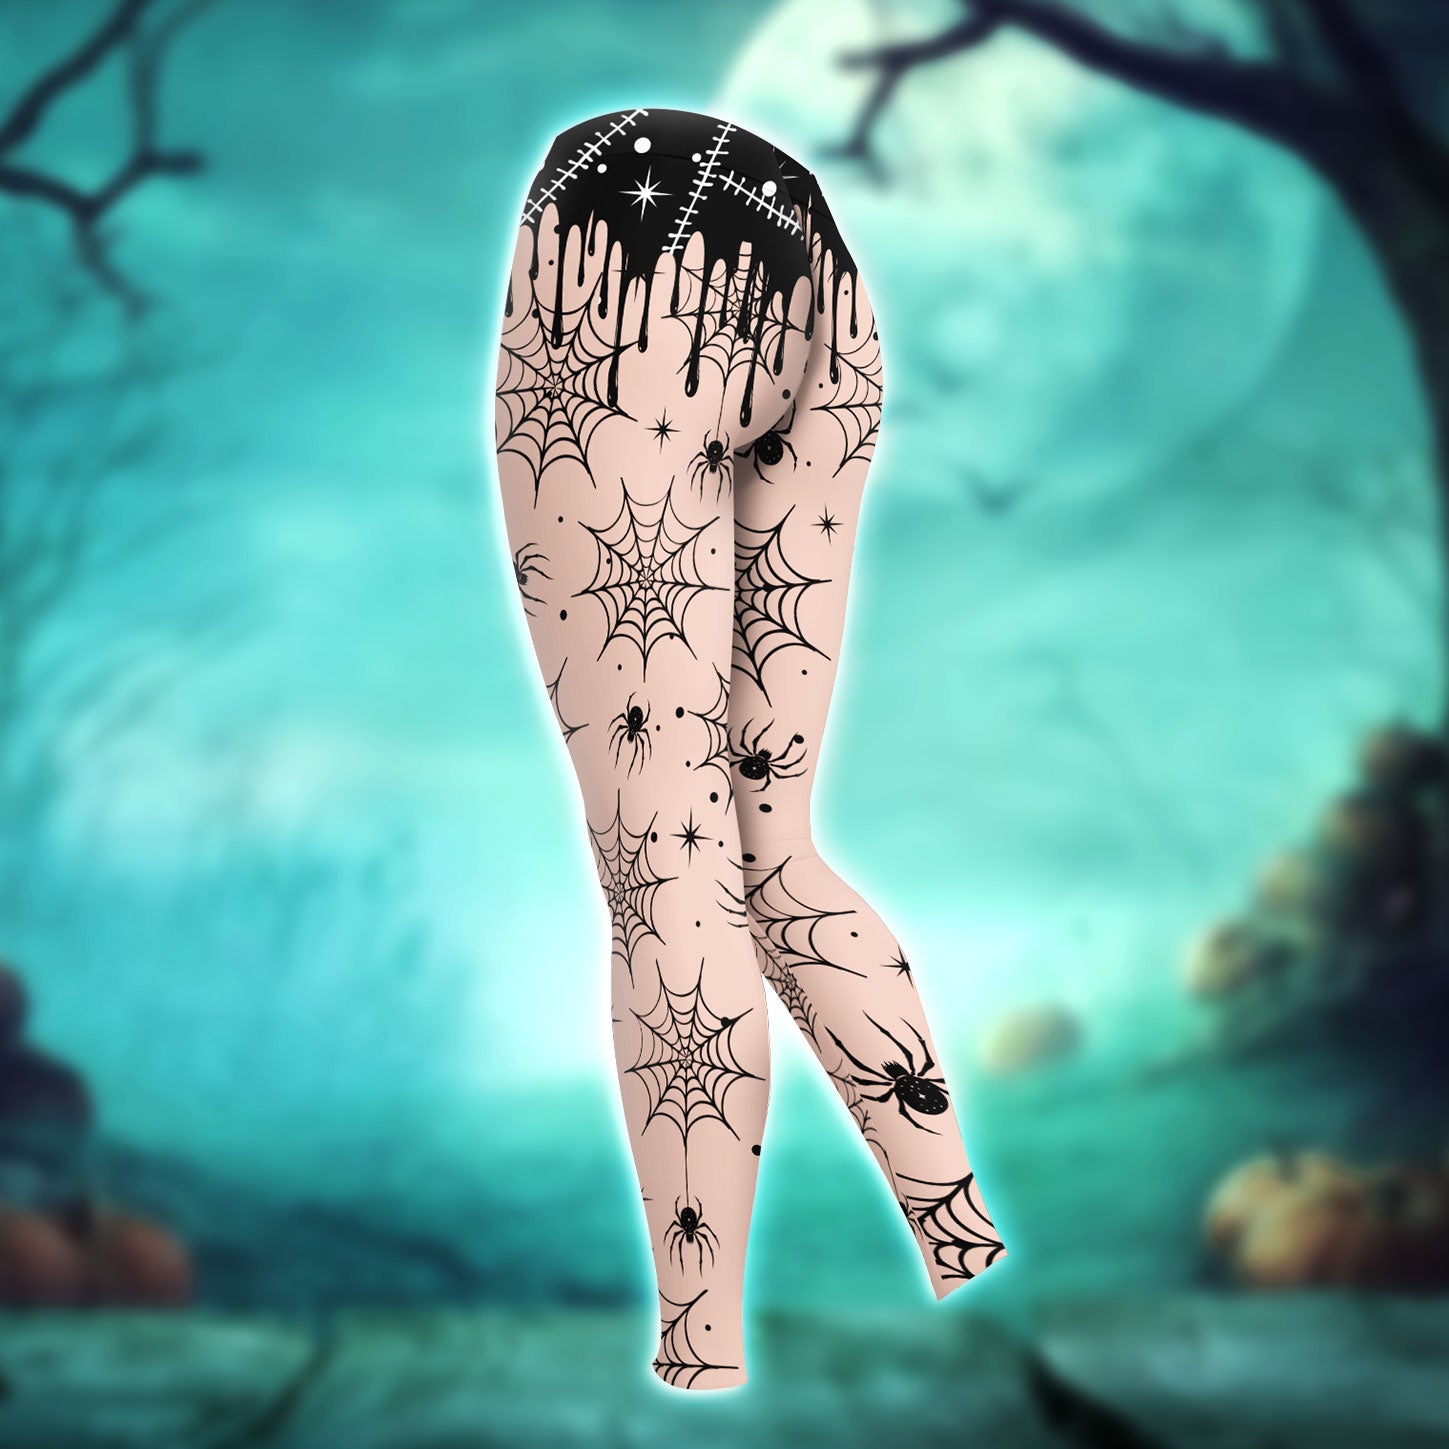 Nightmare Stitches Art Theme Combo Hoodie and Leggings - Dark and edgy matching set with skull designs for a unique and stylish look